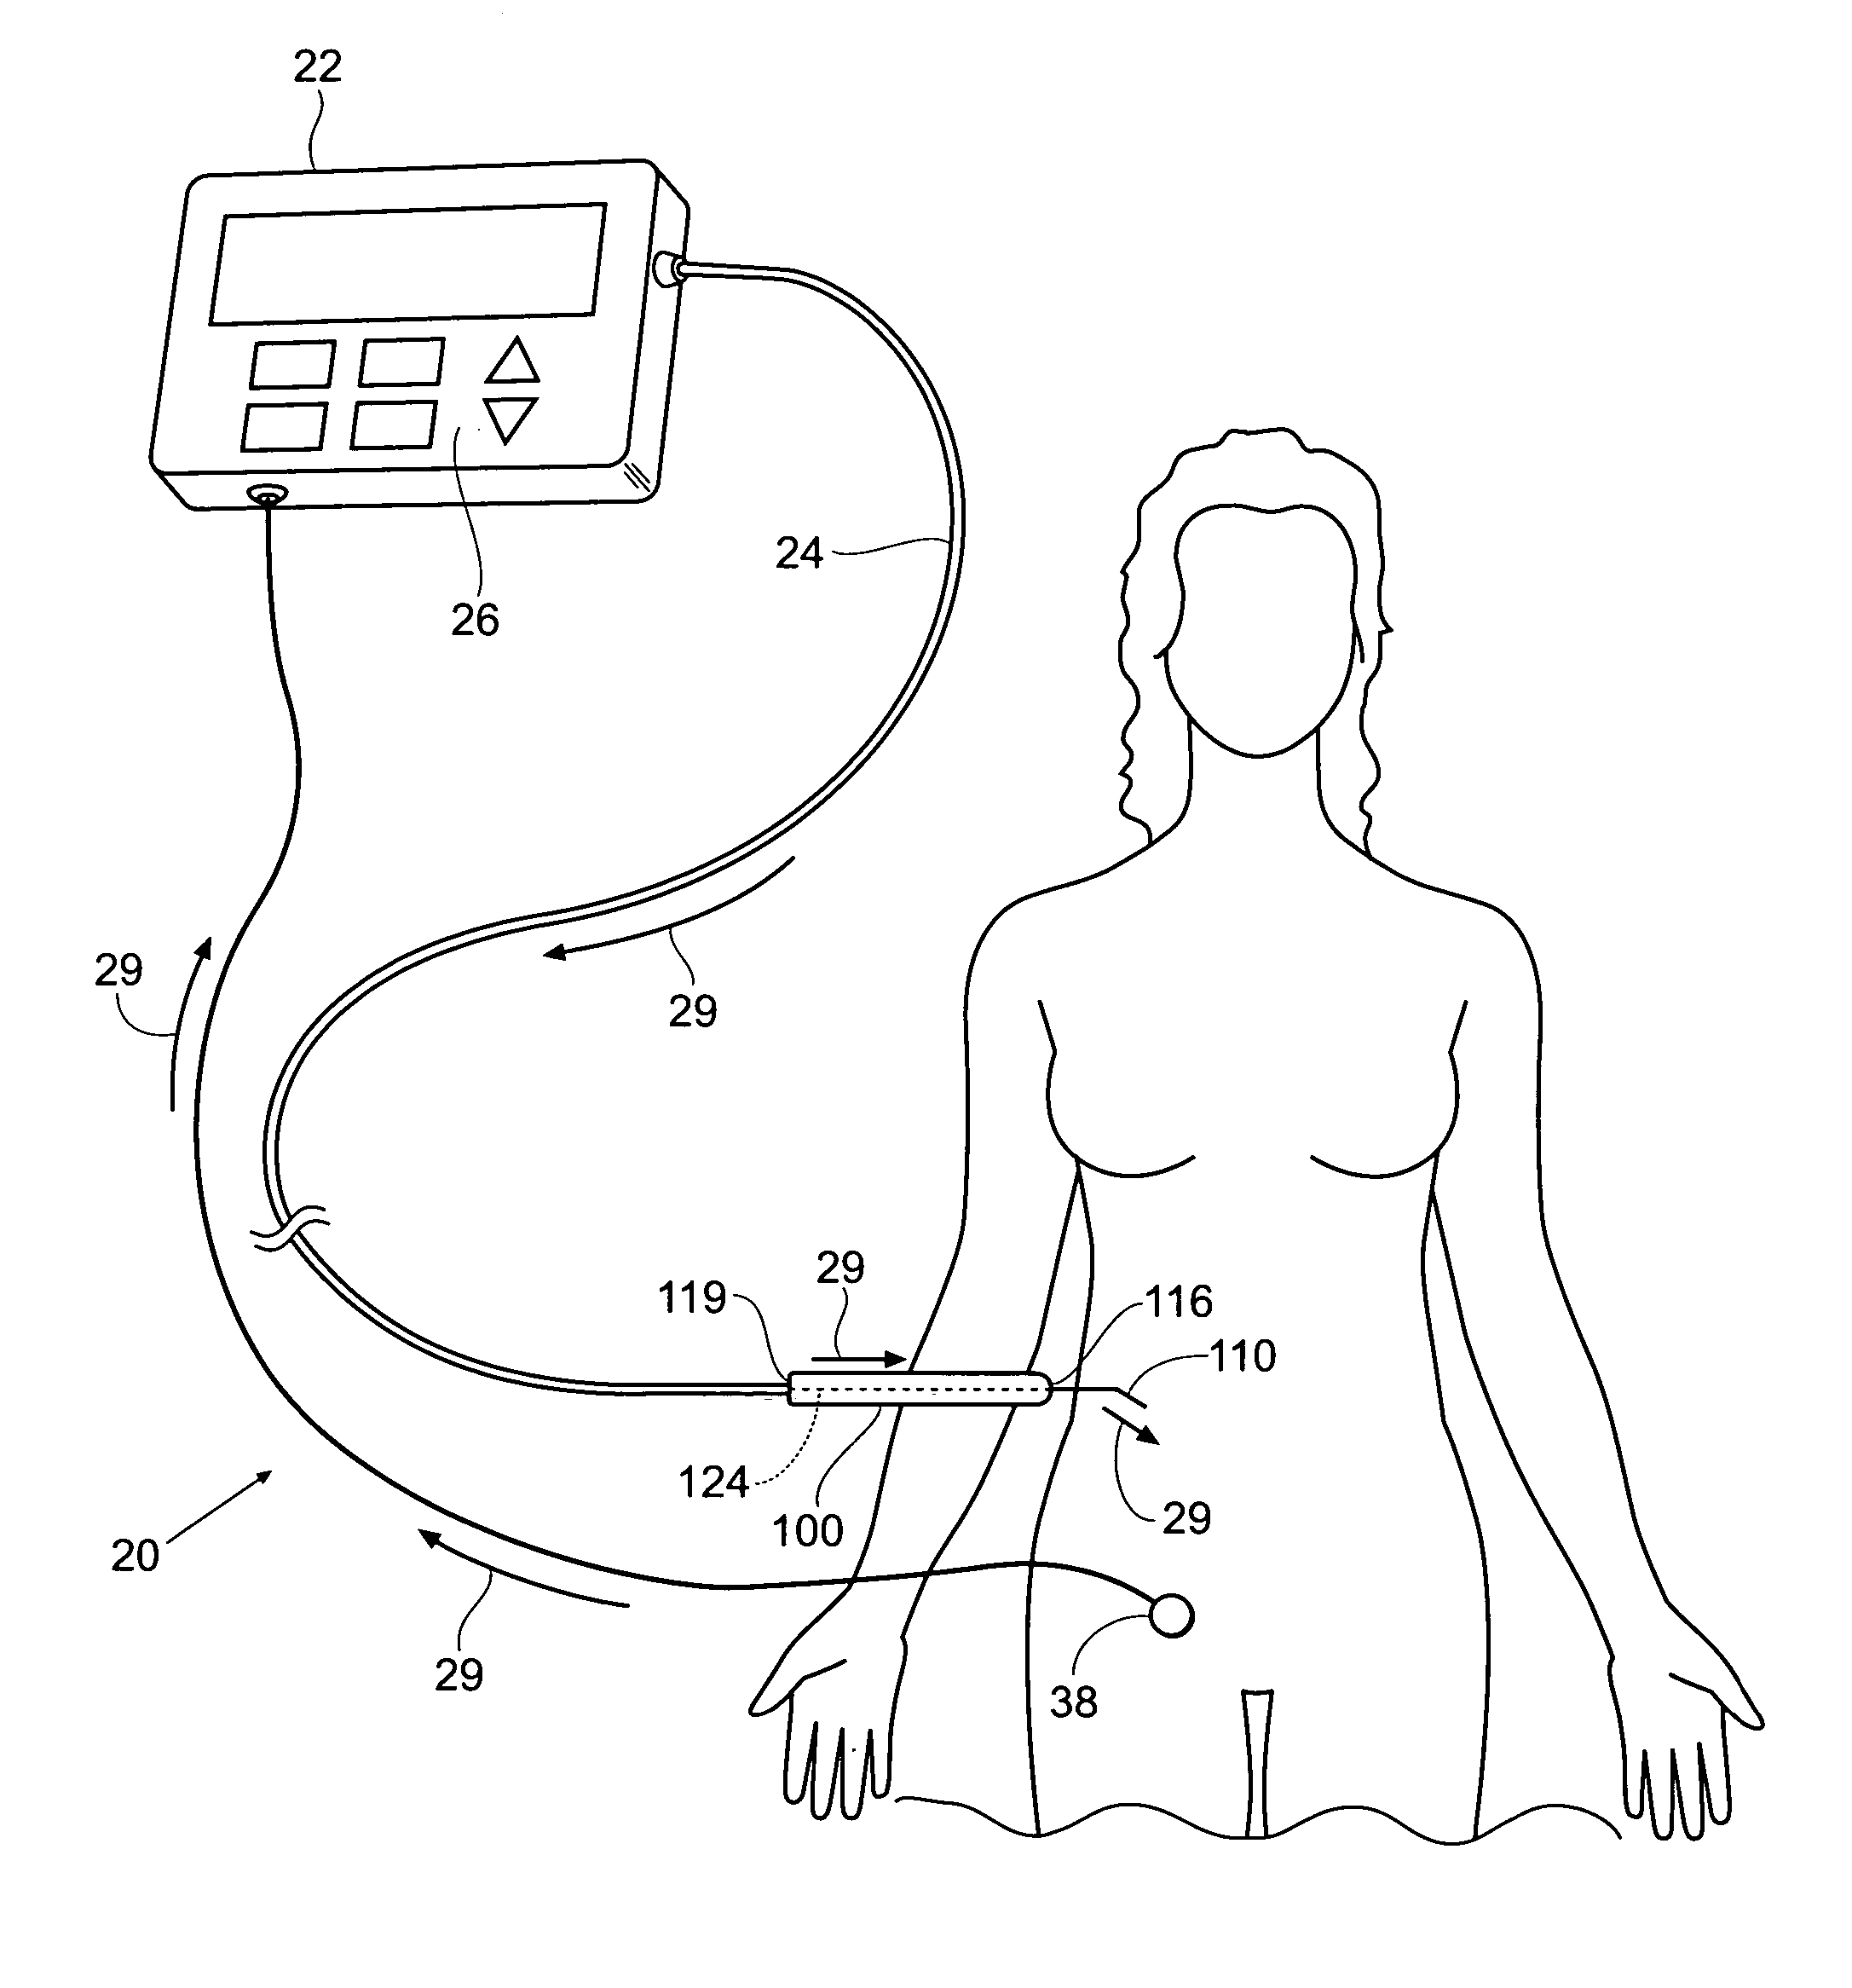 Systems and methods for intra-operative stimulation